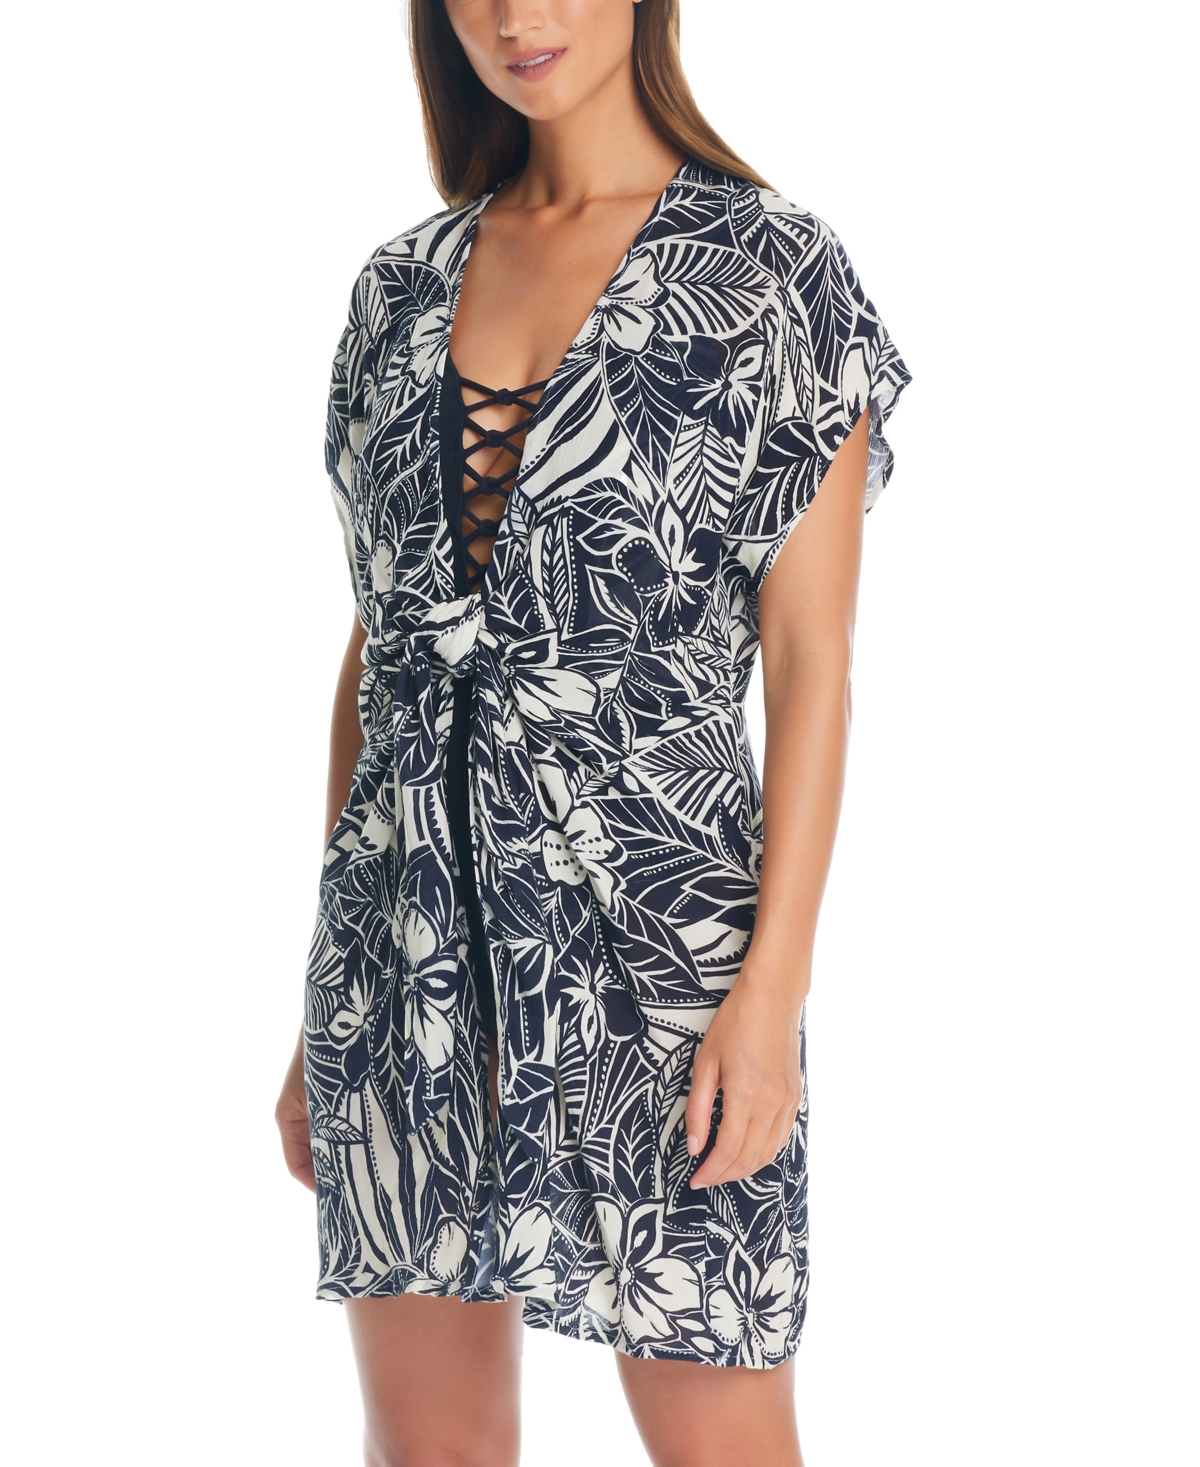 Women's Ciao Bella Printed Cover-Up Dress - Black